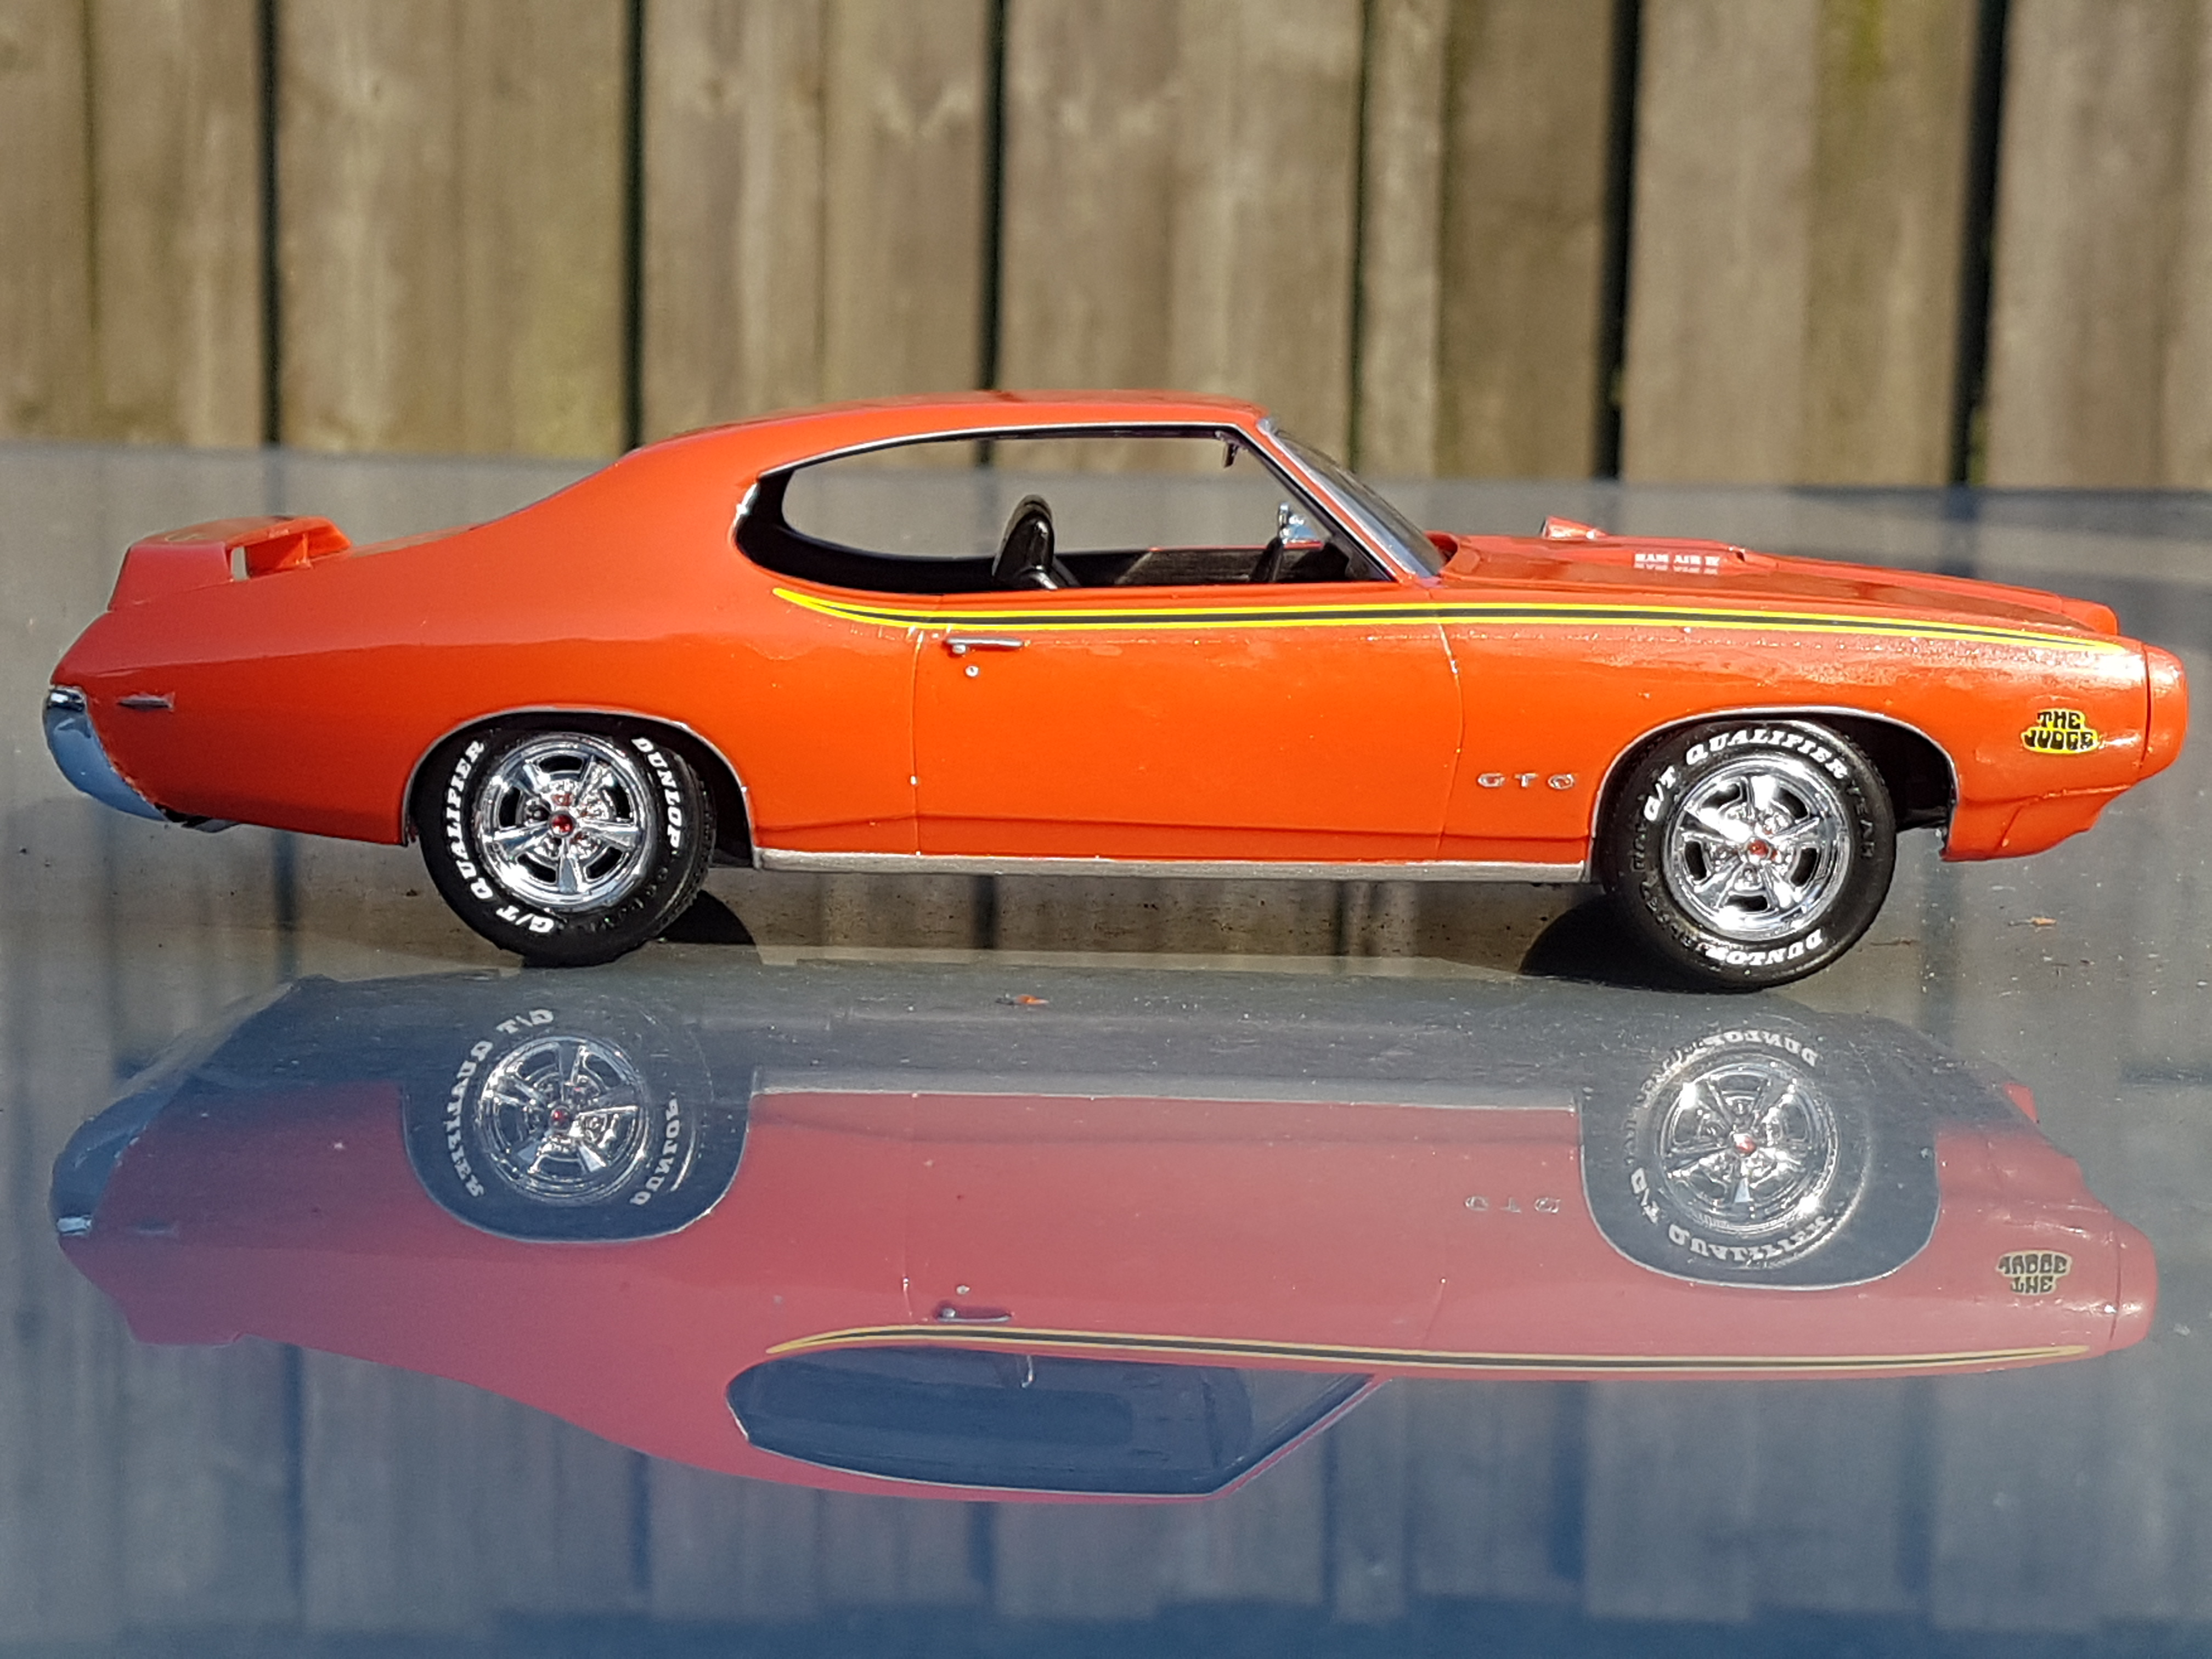 Details about   PONTIAC GTO 1969 and a THE JUDGE KEYCHAIN 2 PACK 